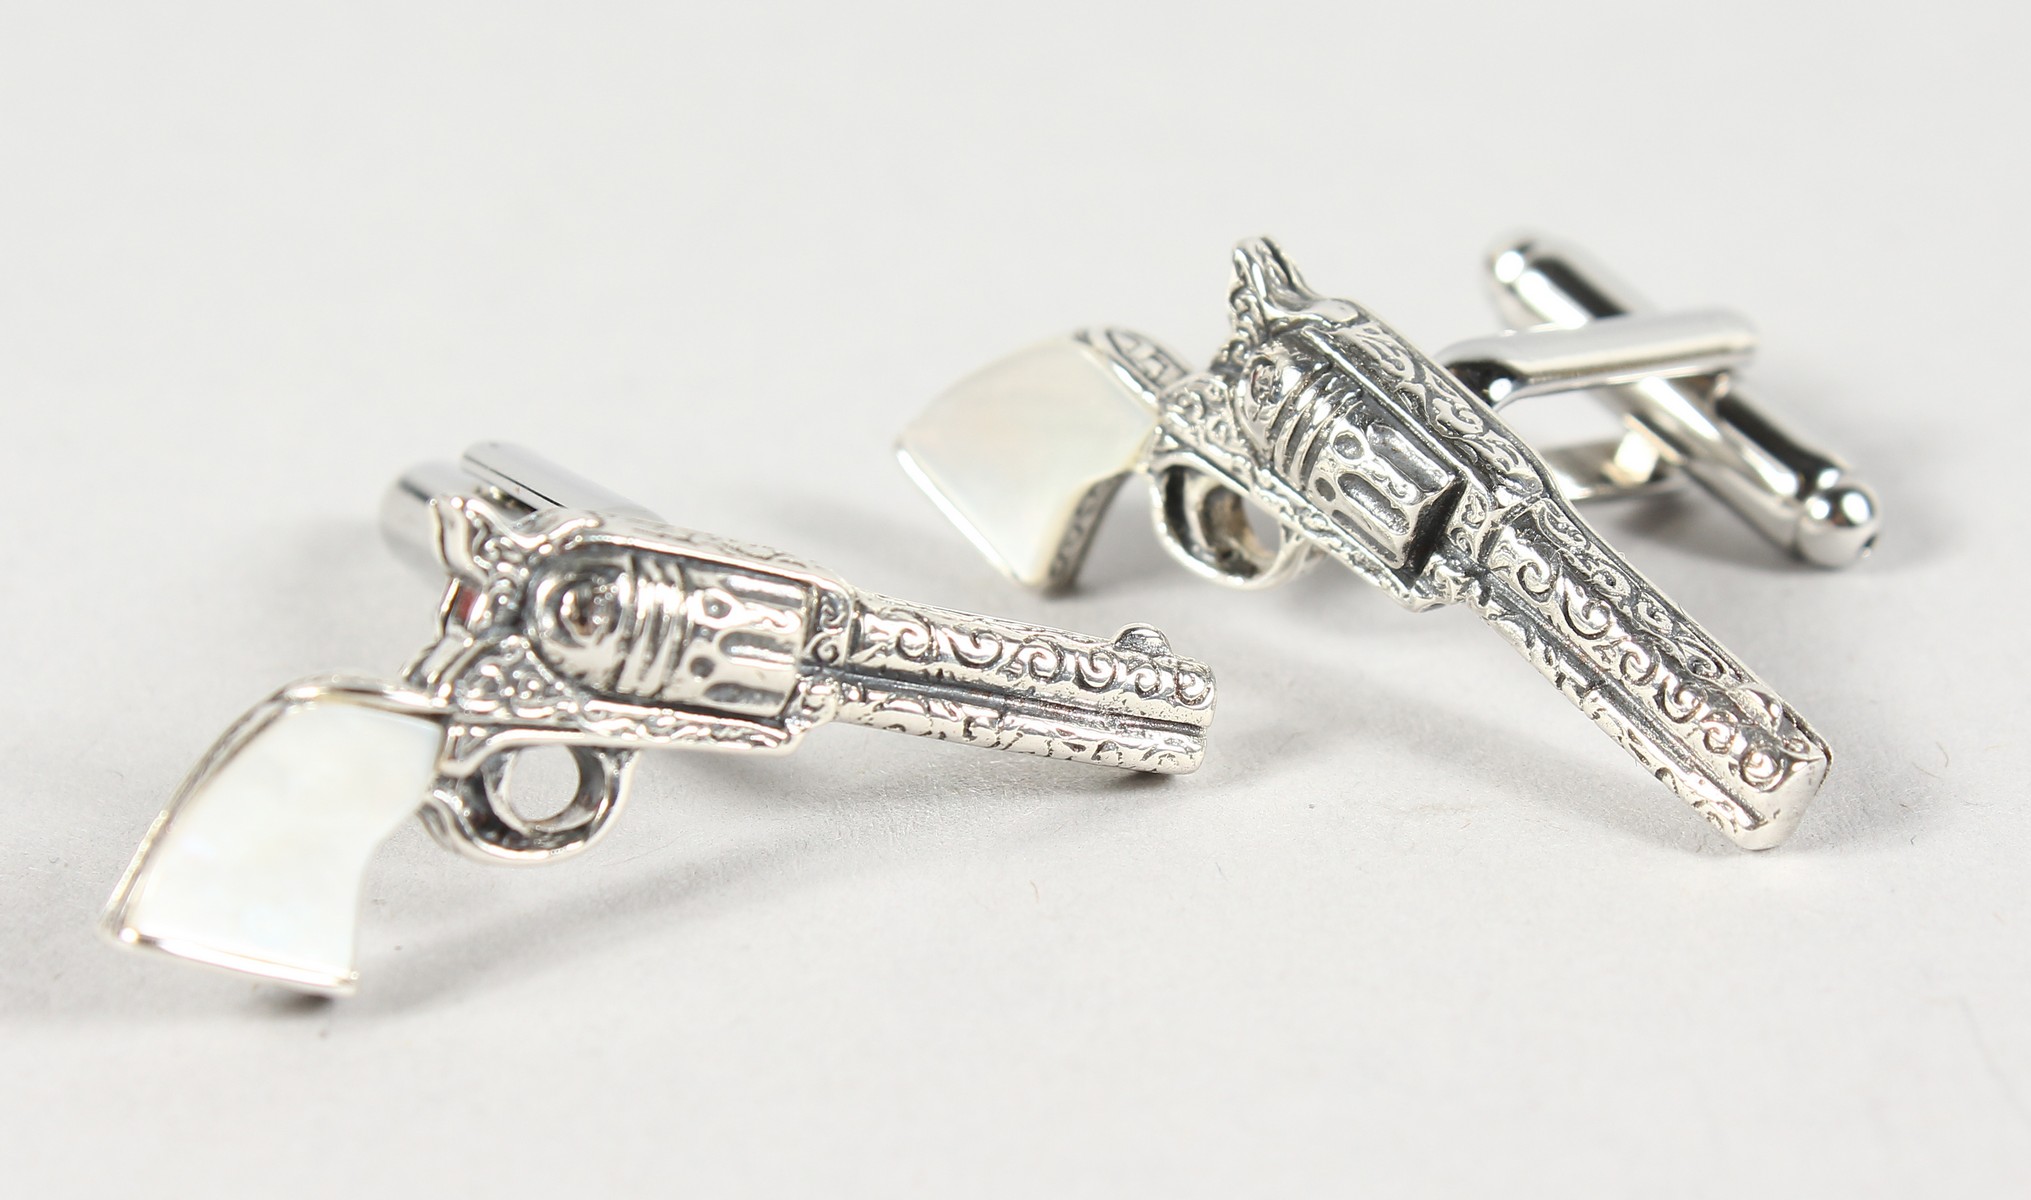 A PAIR OF SILVER AND MOTHER-OF-PEARL PISTOL CUFFLINKS.